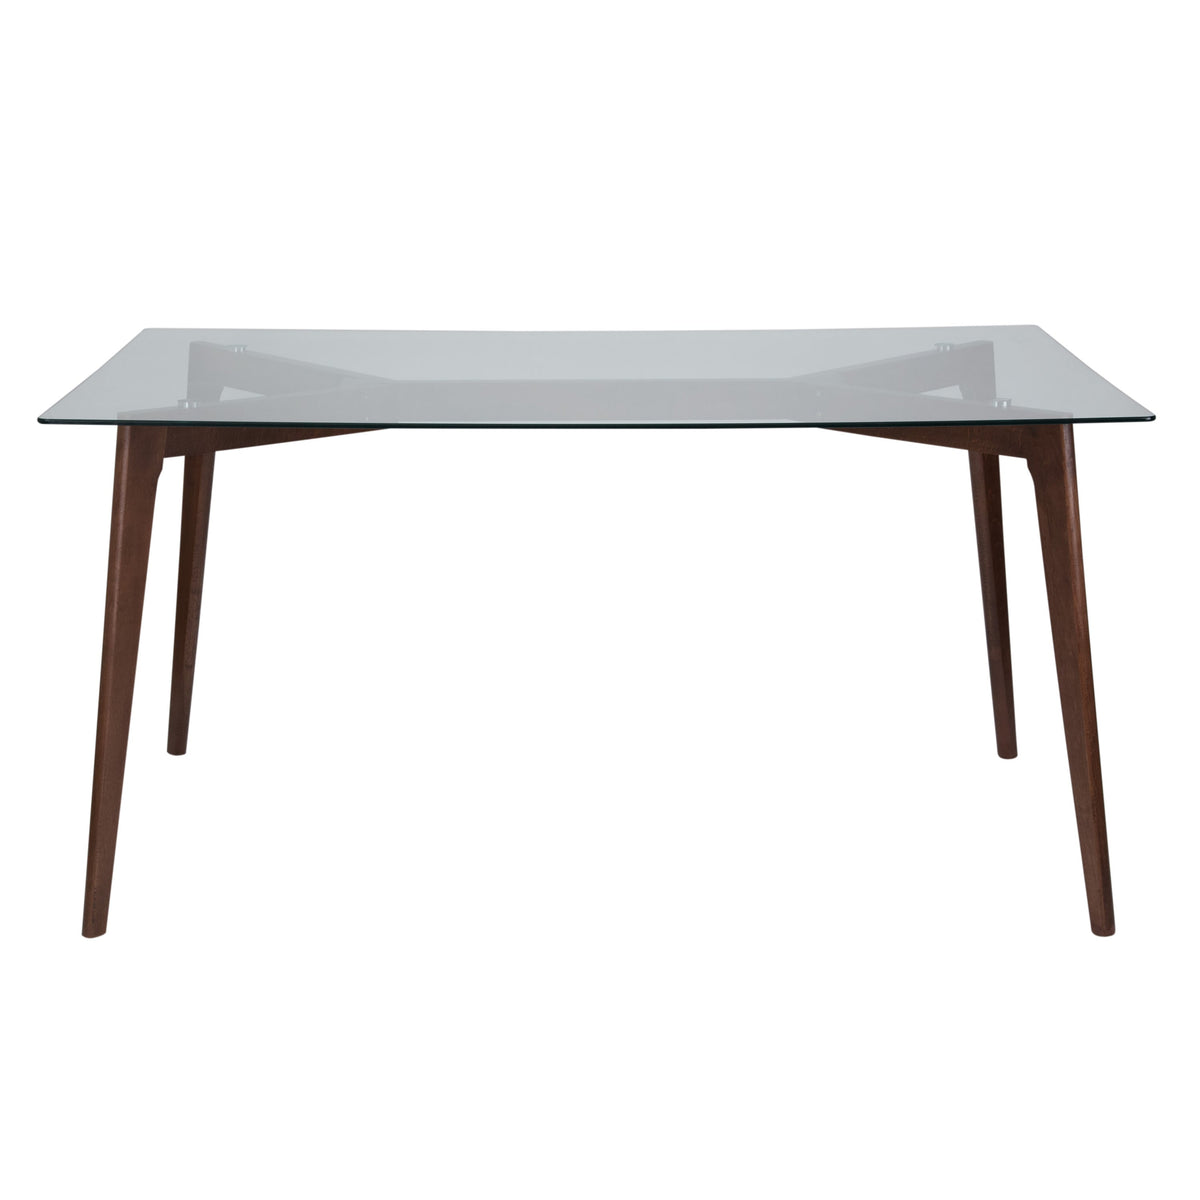 Clear Top/Walnut Frame |#| 35.25inch x 59inch Rectangular Solid Walnut Wood Table with Clear Glass Top